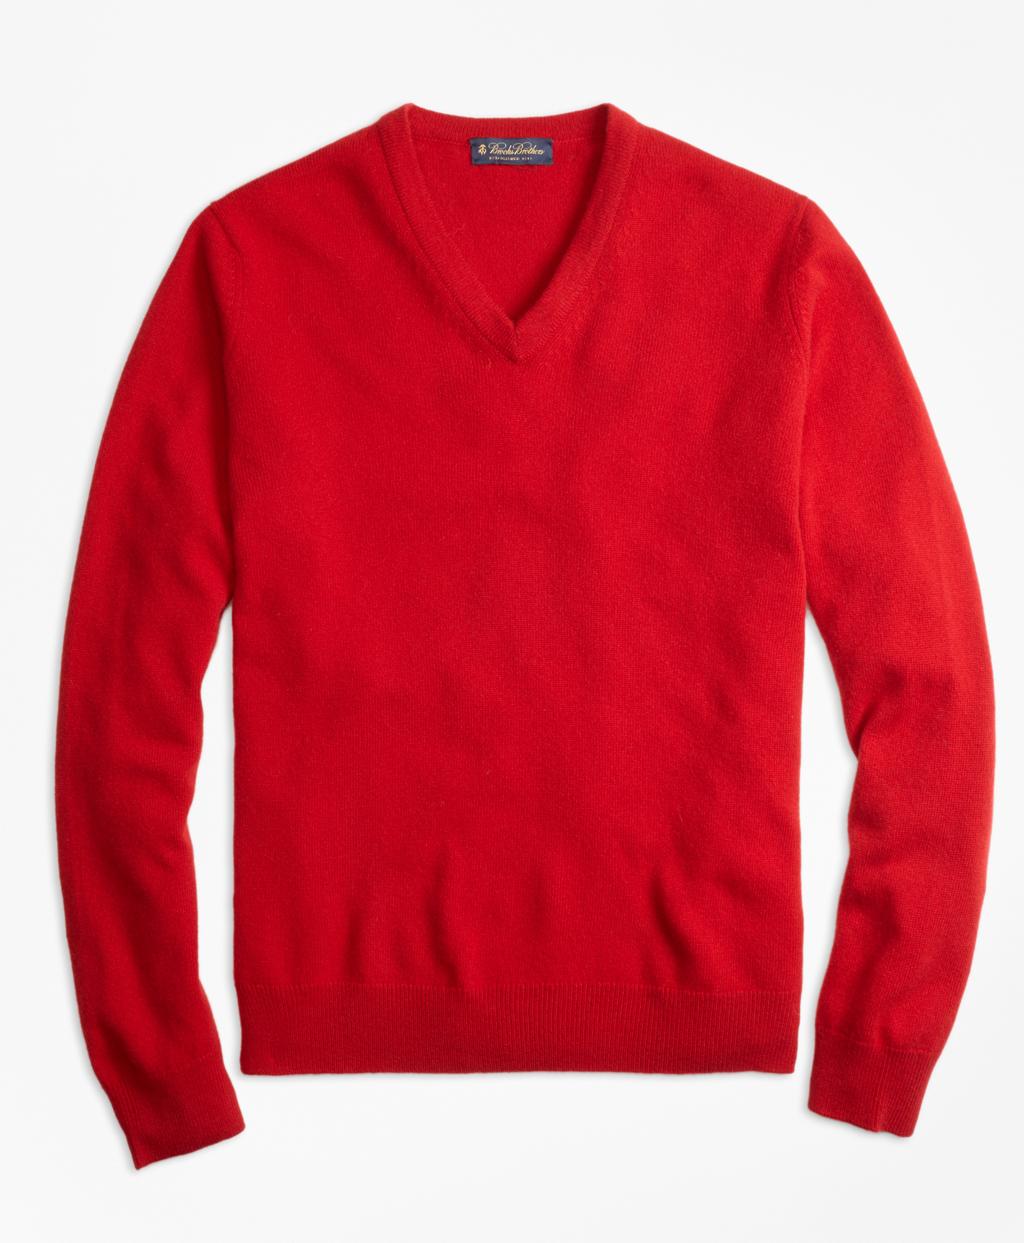 Brooks Brothers Cashmere V-neck Sweater in Red for Men - Lyst